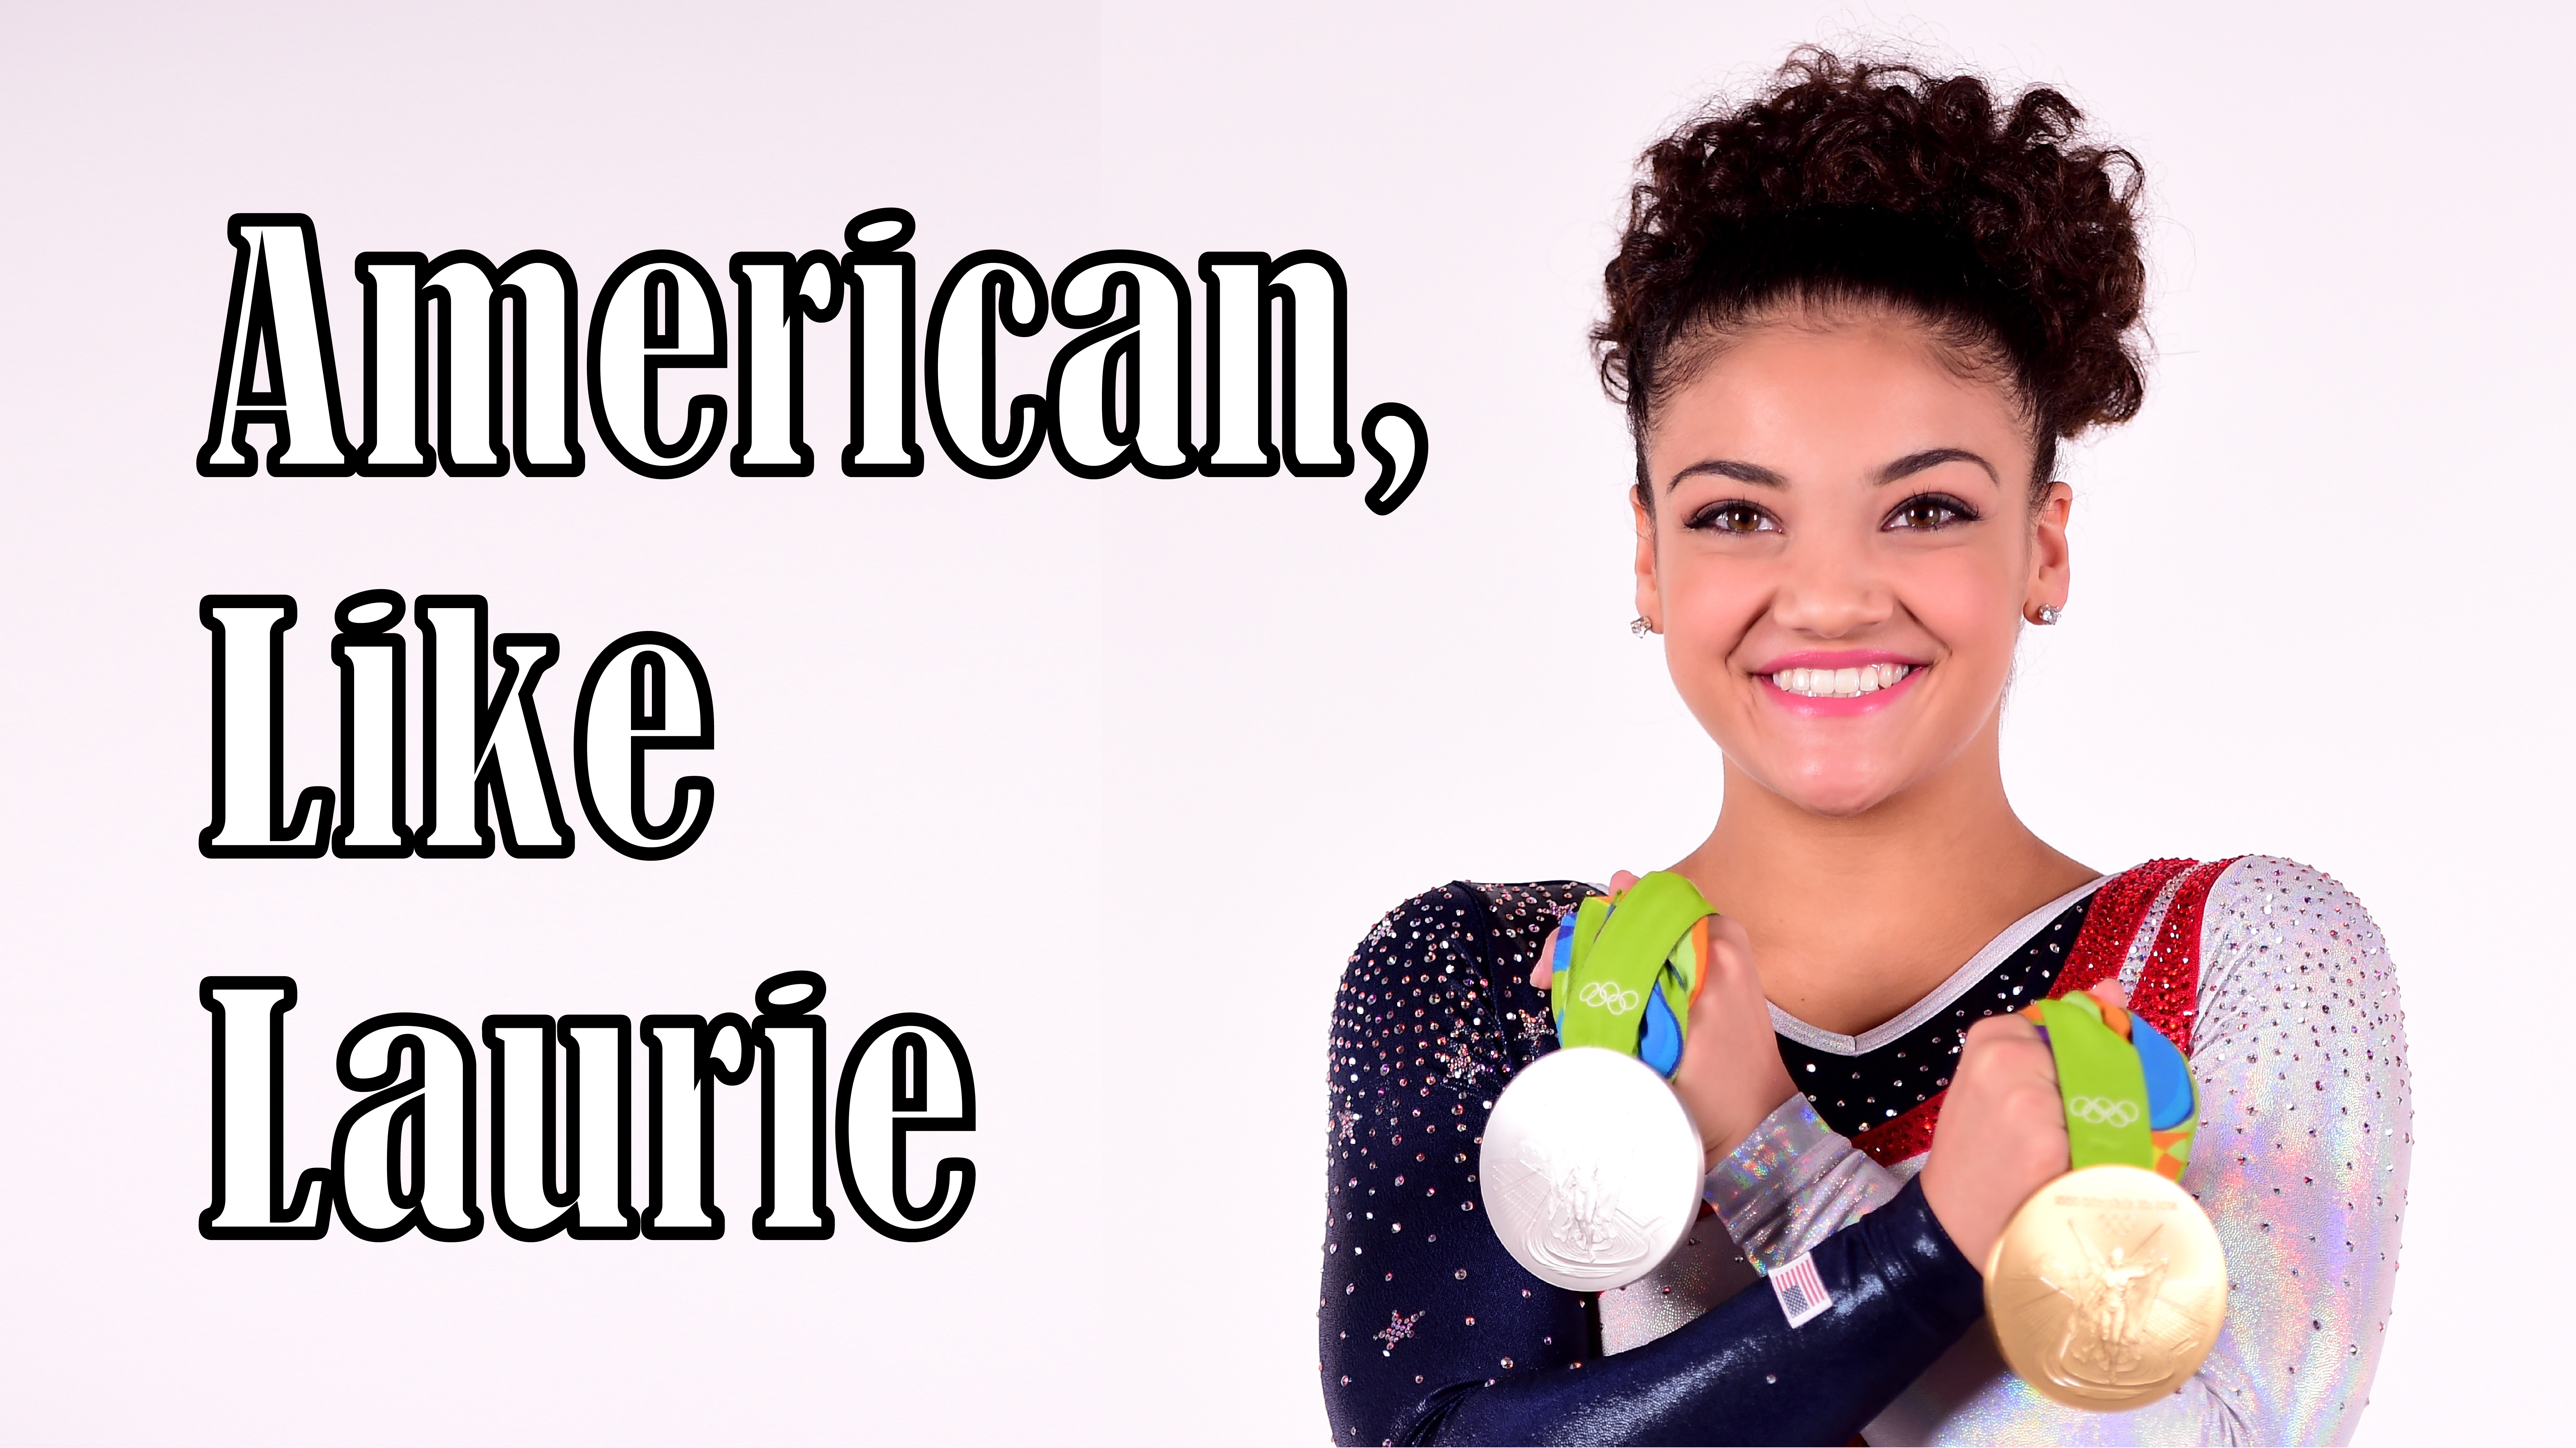 Laurie Hernandez poses with a gold and silver medal in front of a blank background that says American, Like Laurie